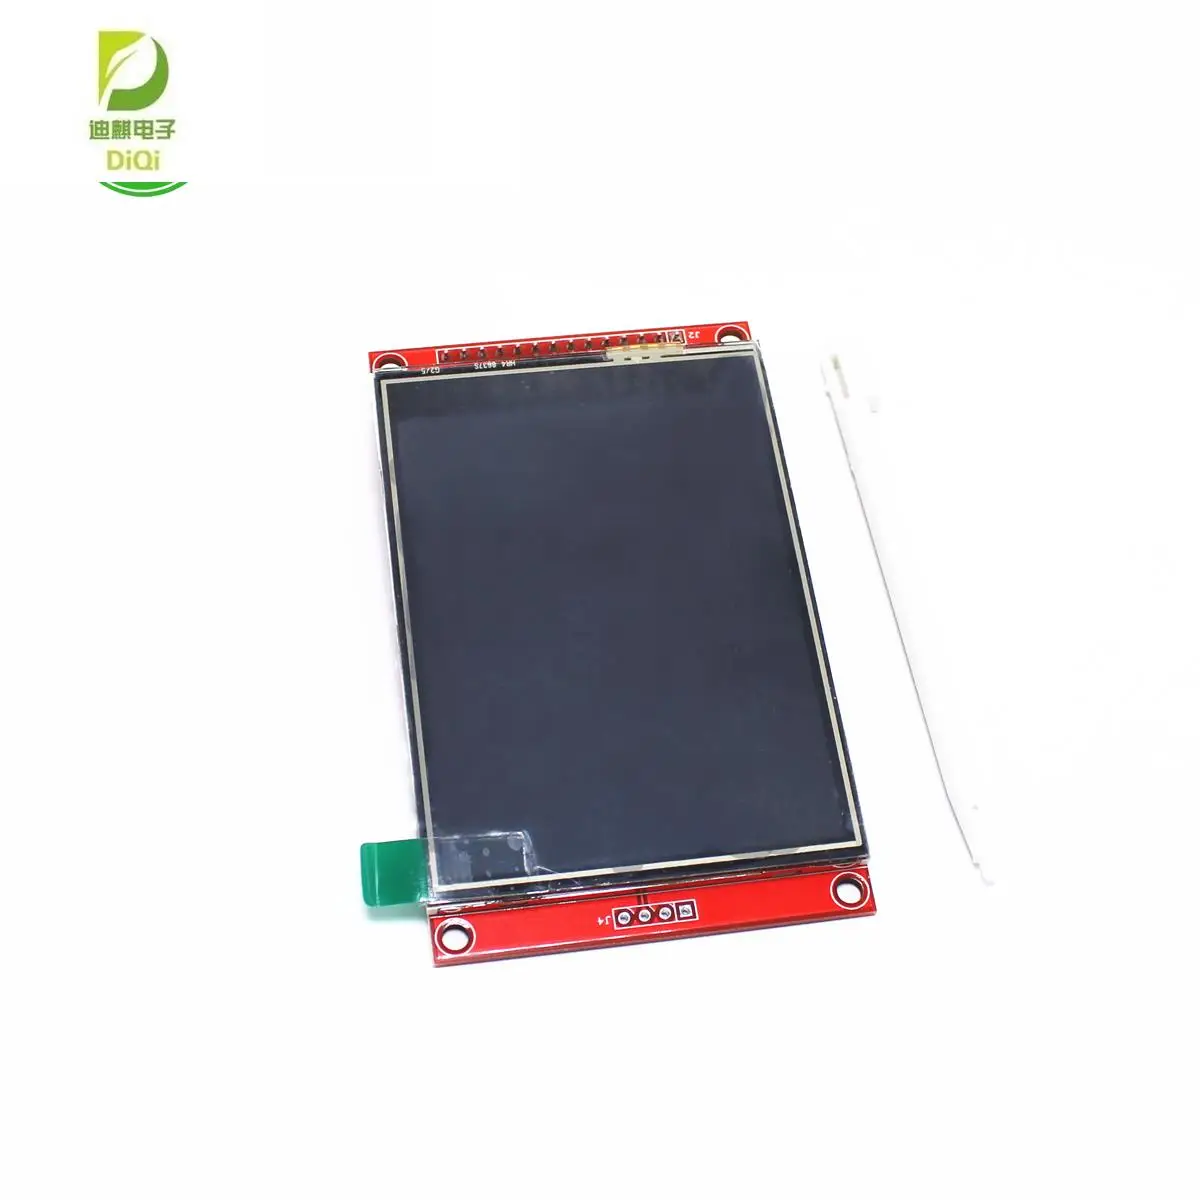 

New 3.2 inch 320*240 SPI Serial TFT LCD Module Display Screen with Touch Panel Driver IC ILI9341 for Arduino MCU